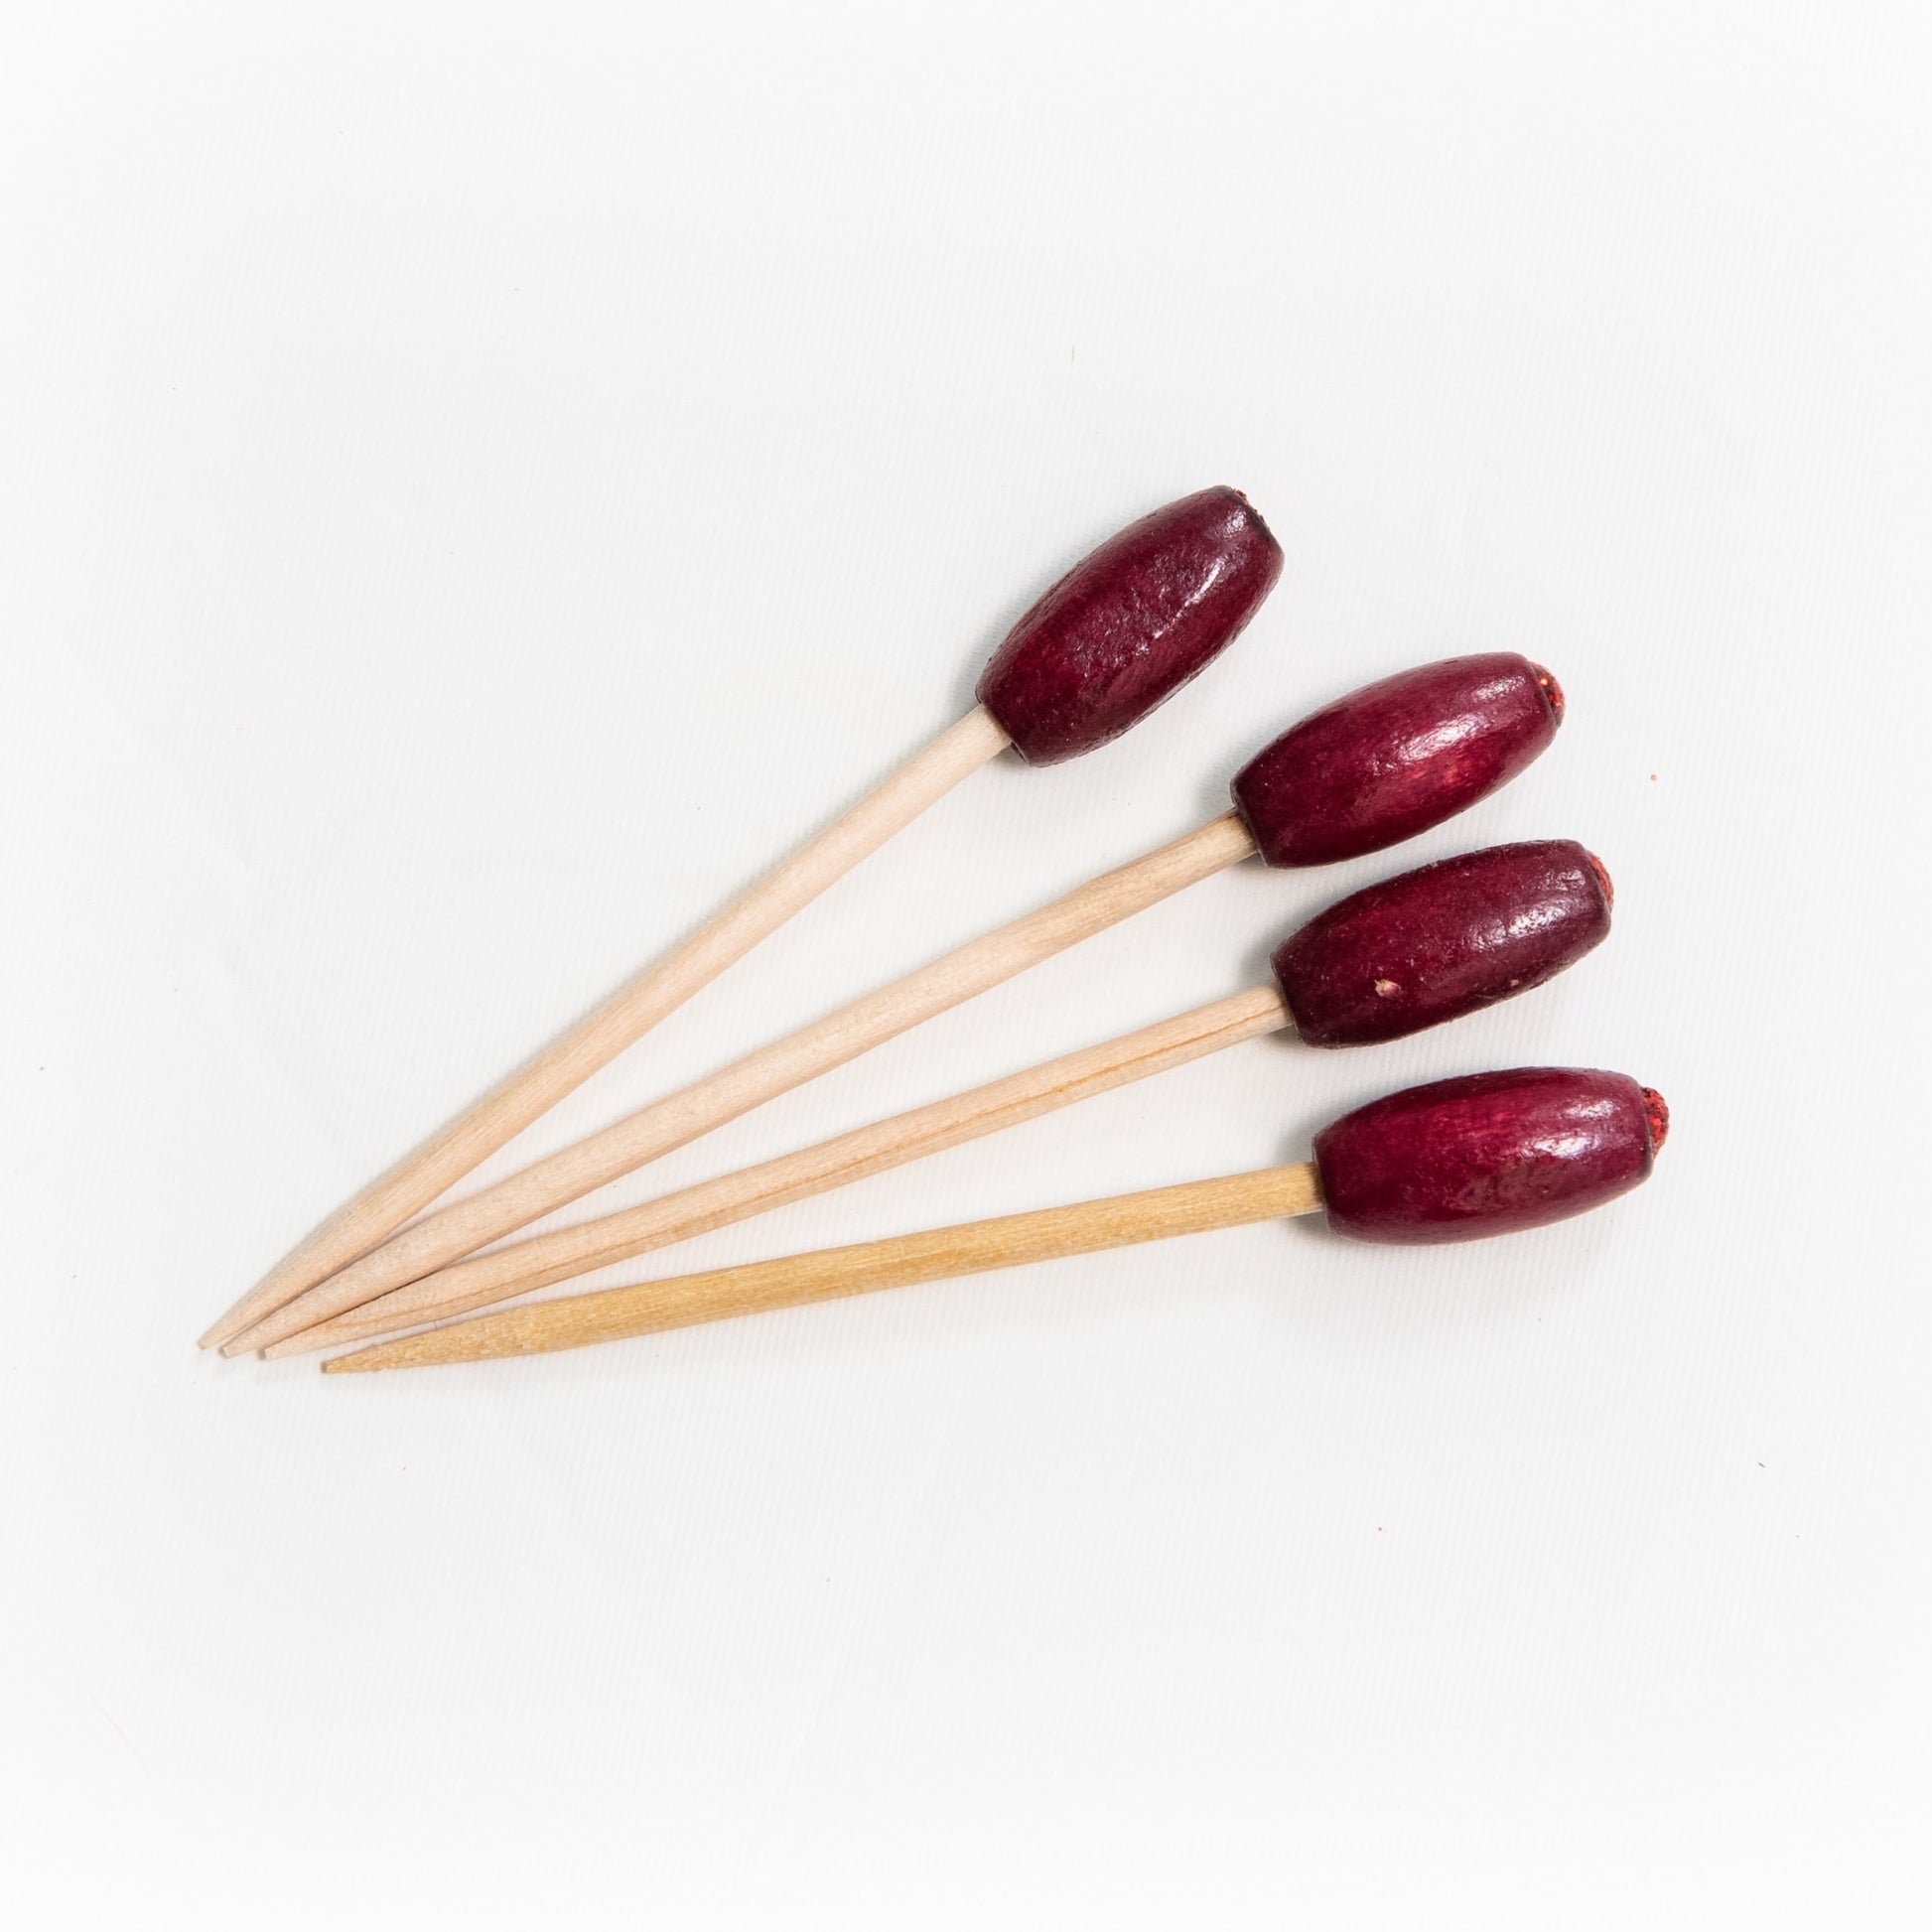 Bamboo Magenta Sparkle Bead Skewers - 100 pieces